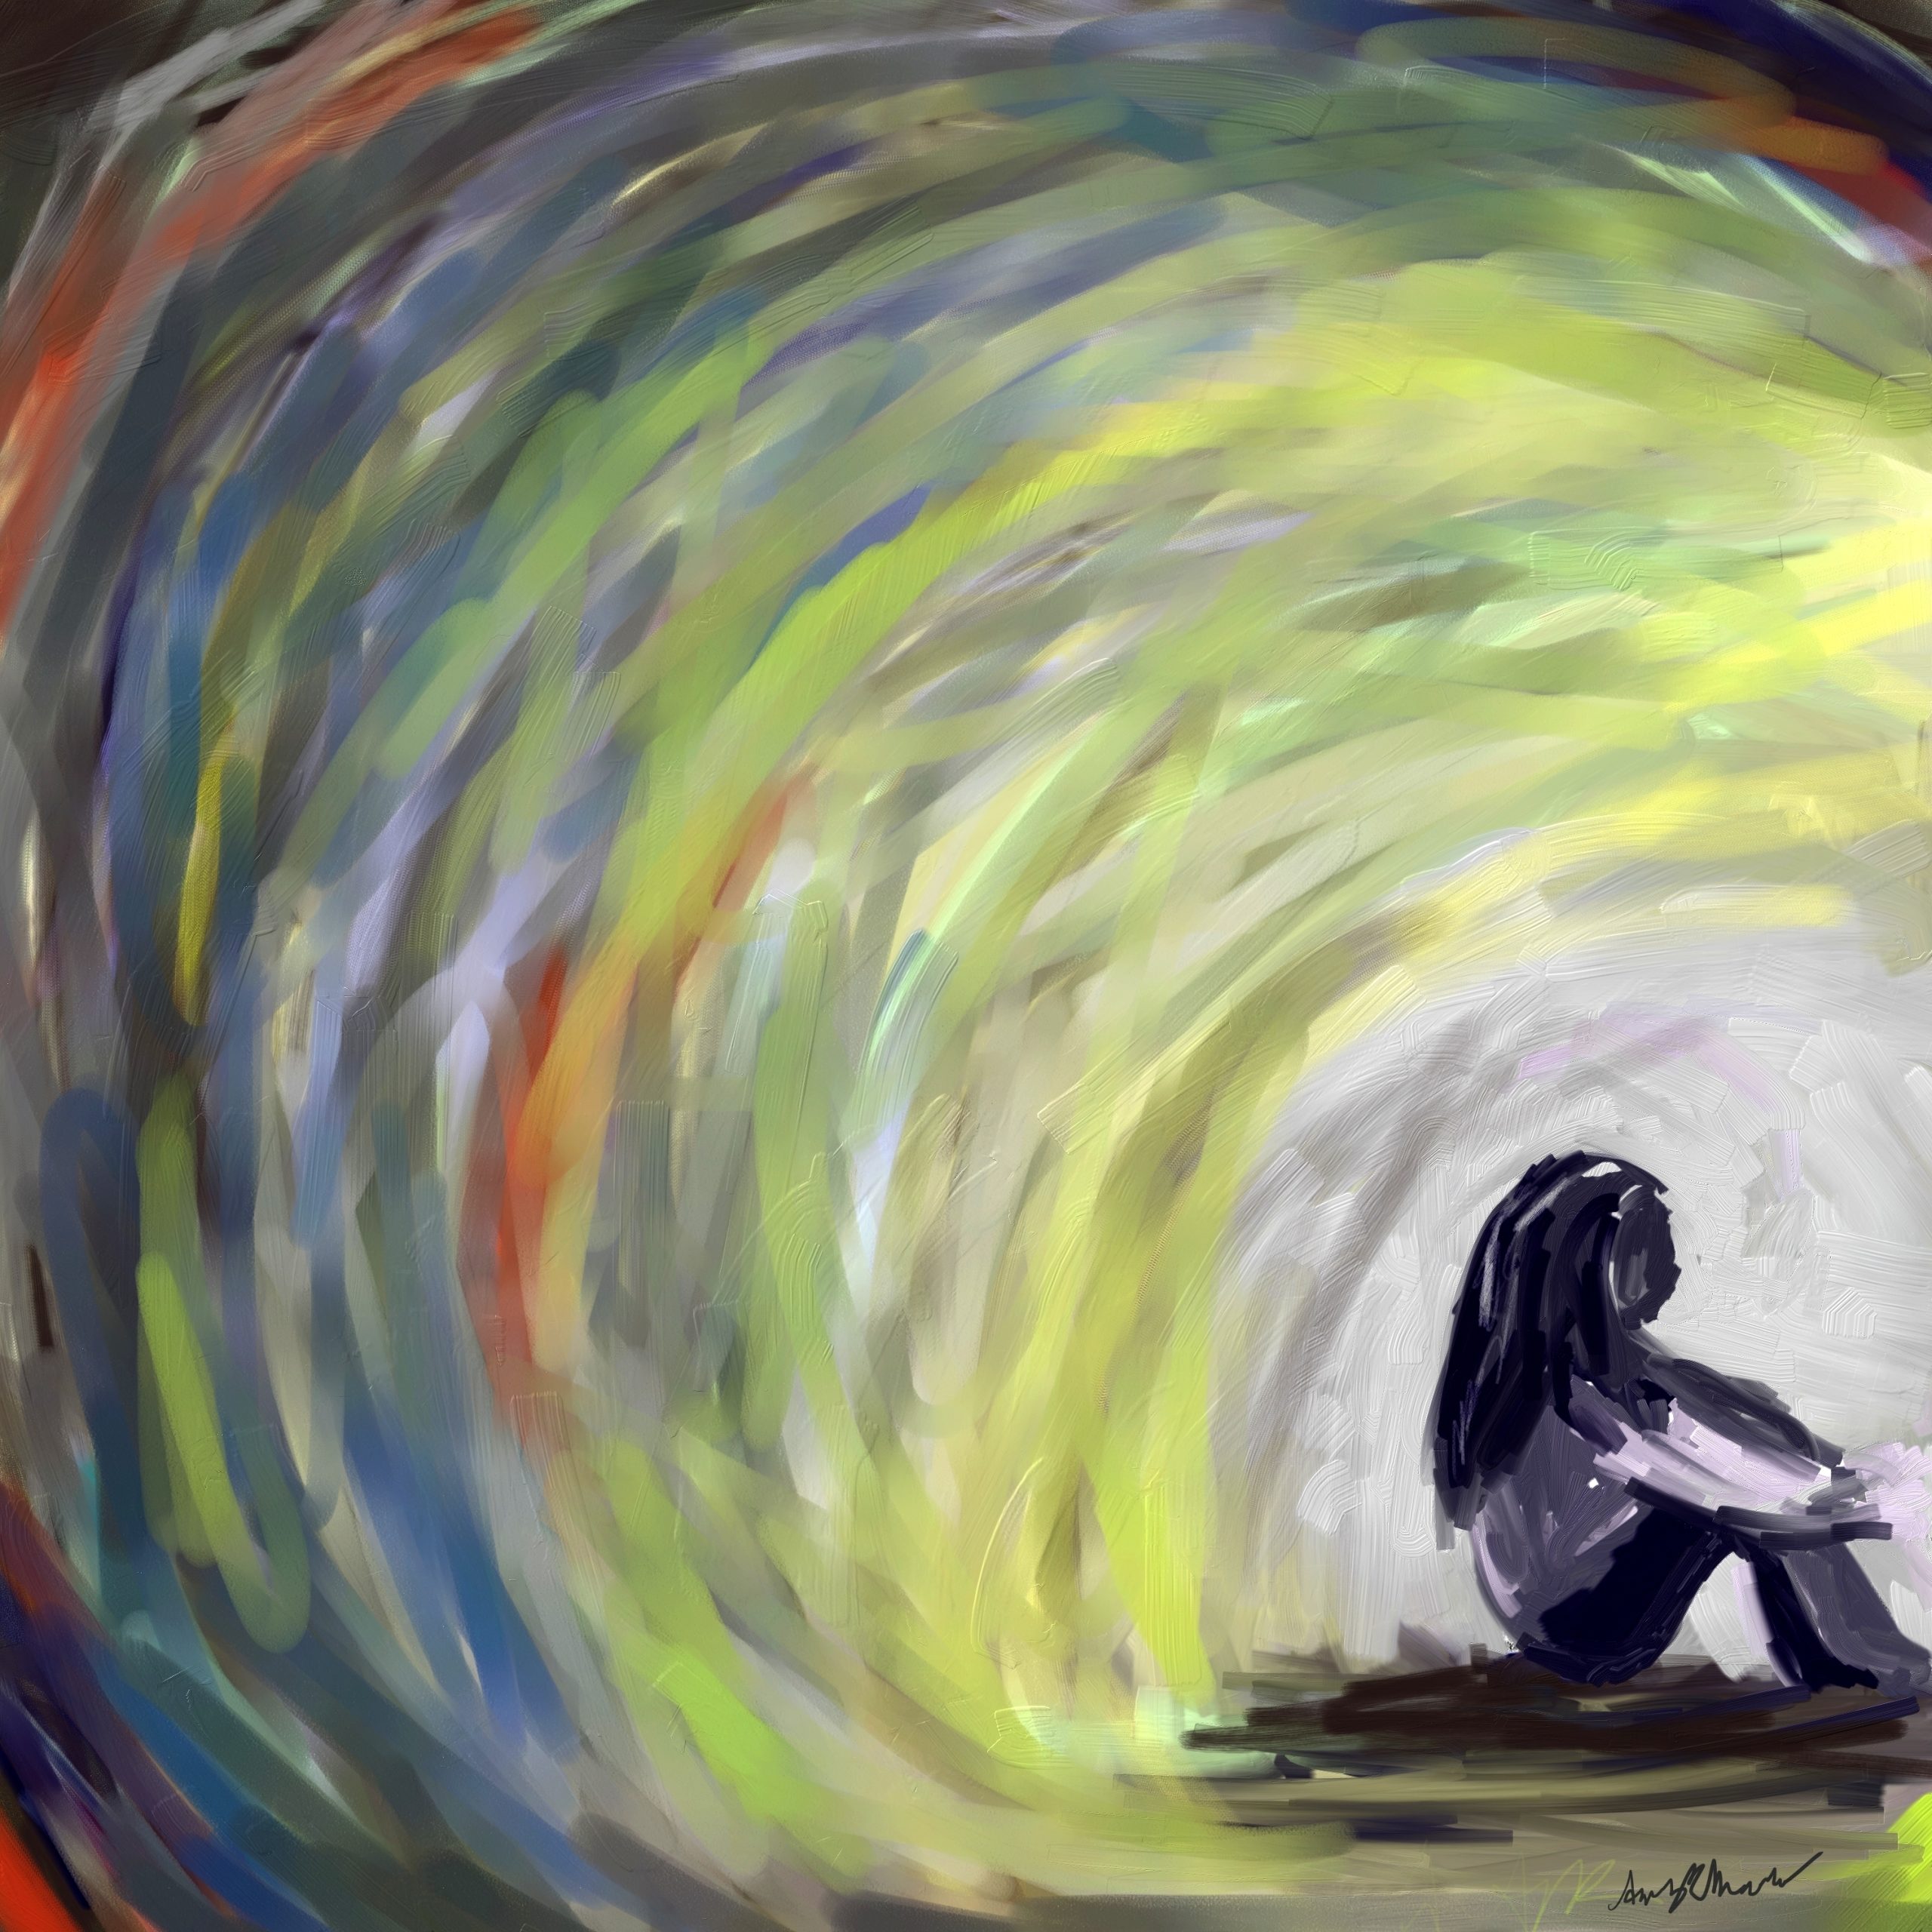 painted image: woman seated with flowing arcs of color. Symbolizes first episode psychosis awareness and early intervention